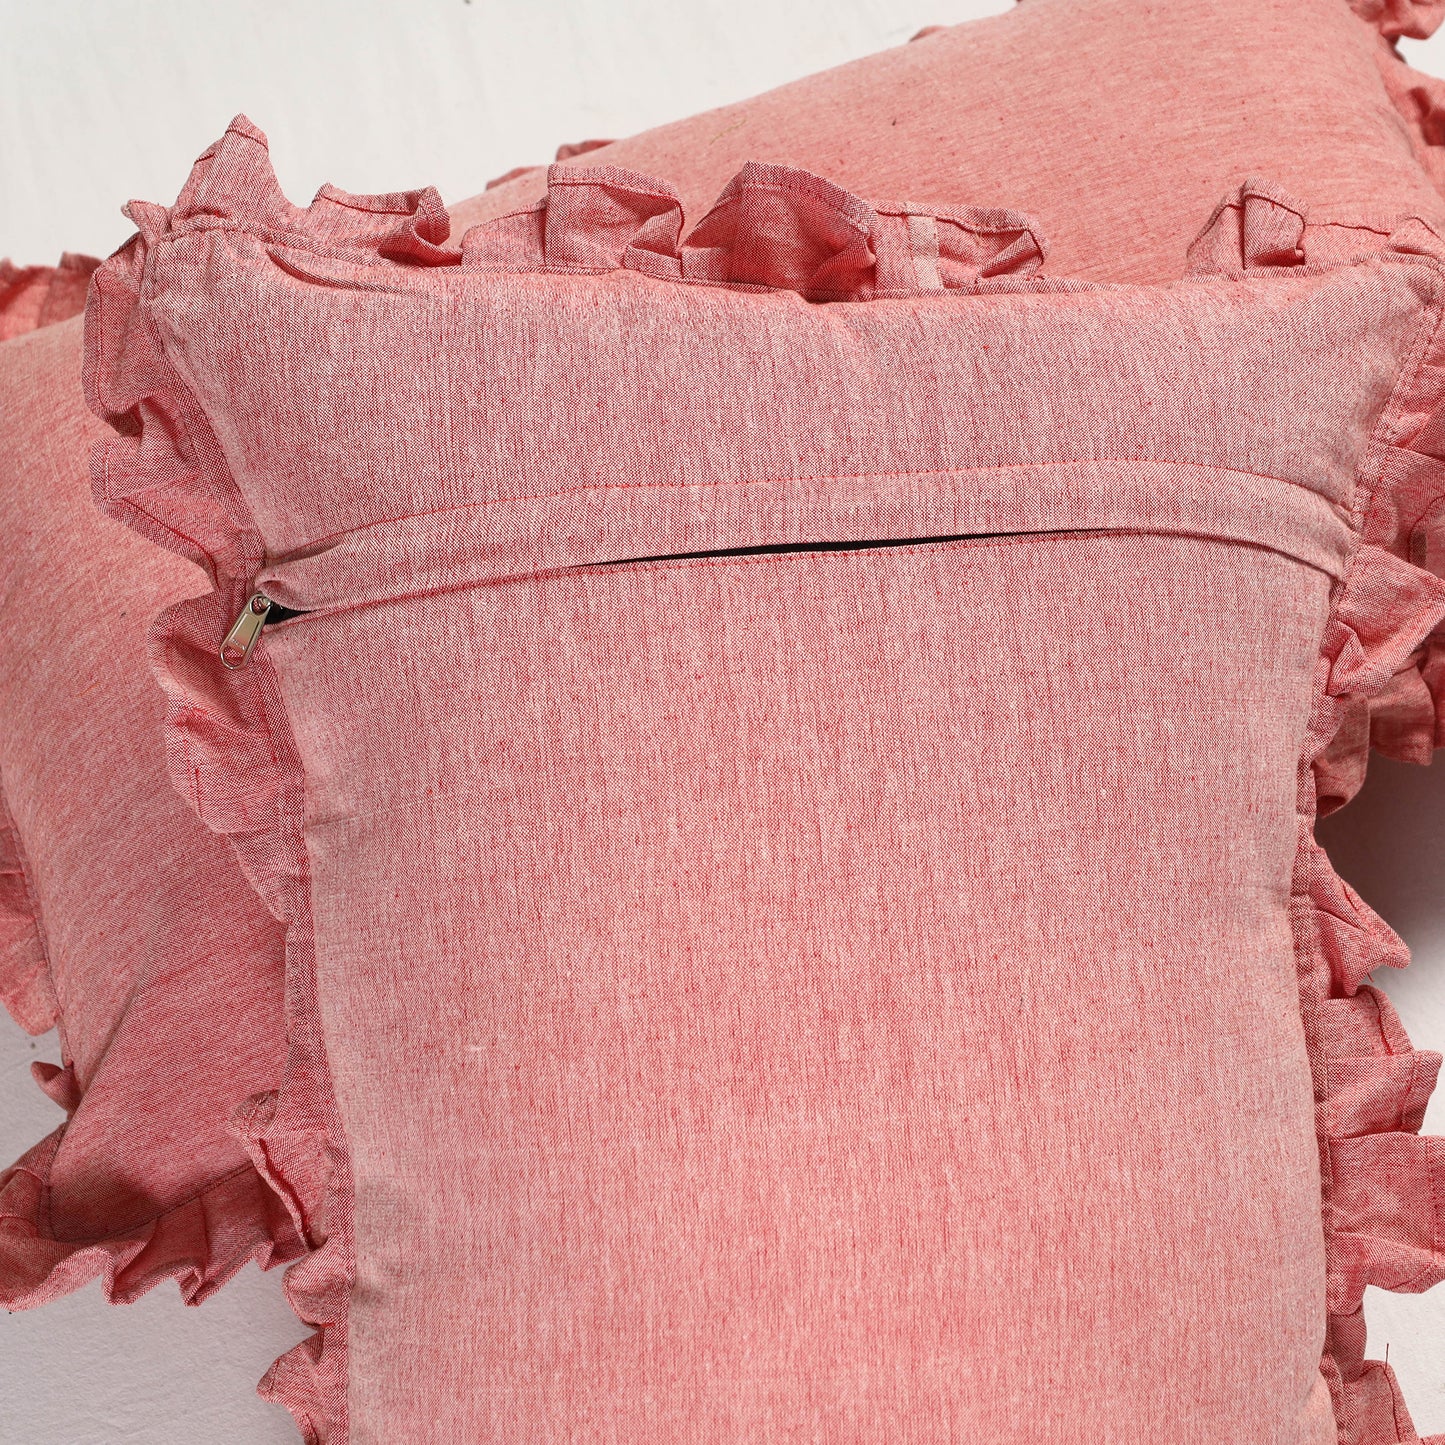 Frill Pillow Covers